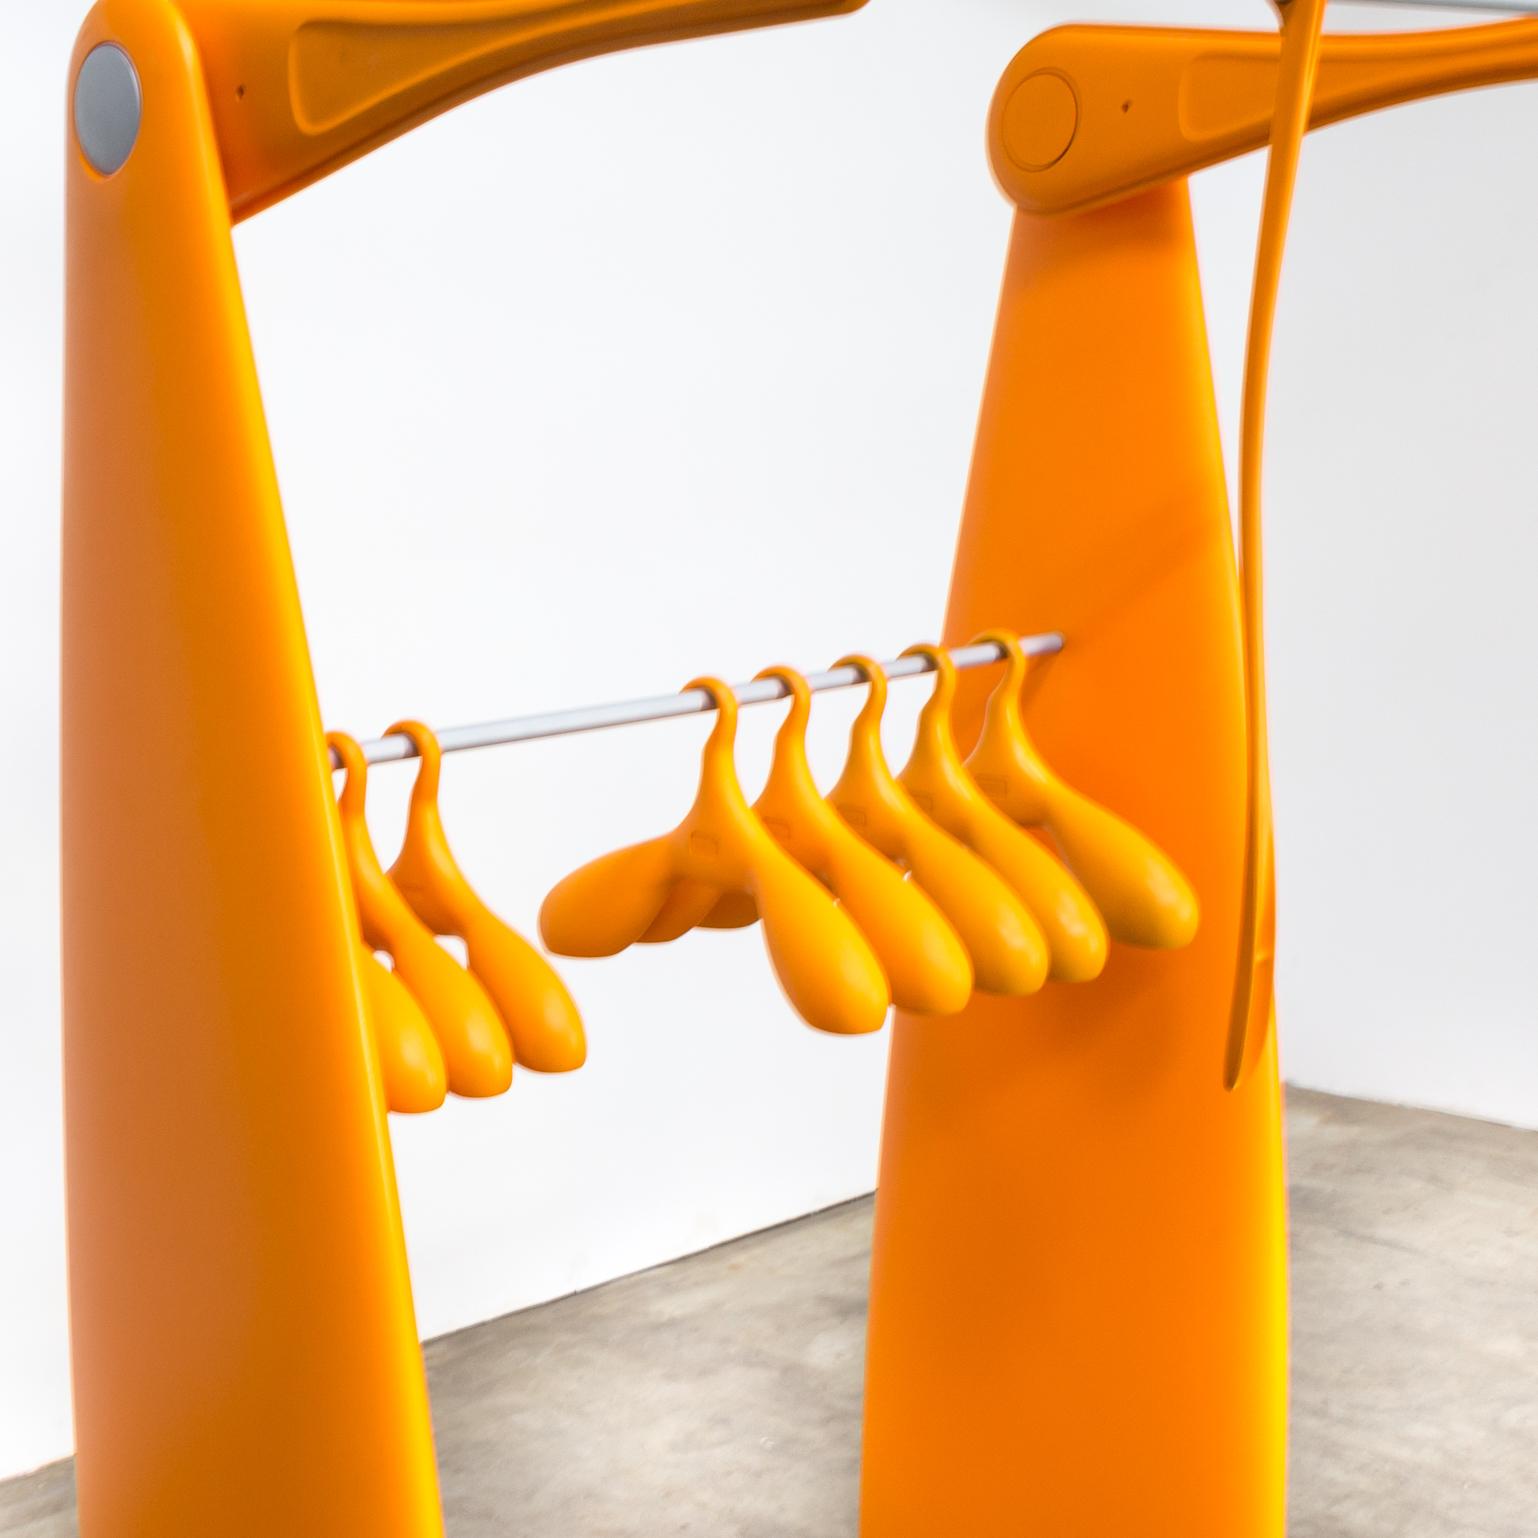 E. Terragni Coat Stand ‘Atelier’ & Servetto Lift and Dino Clothes Hangers In Good Condition For Sale In Amstelveen, Noord